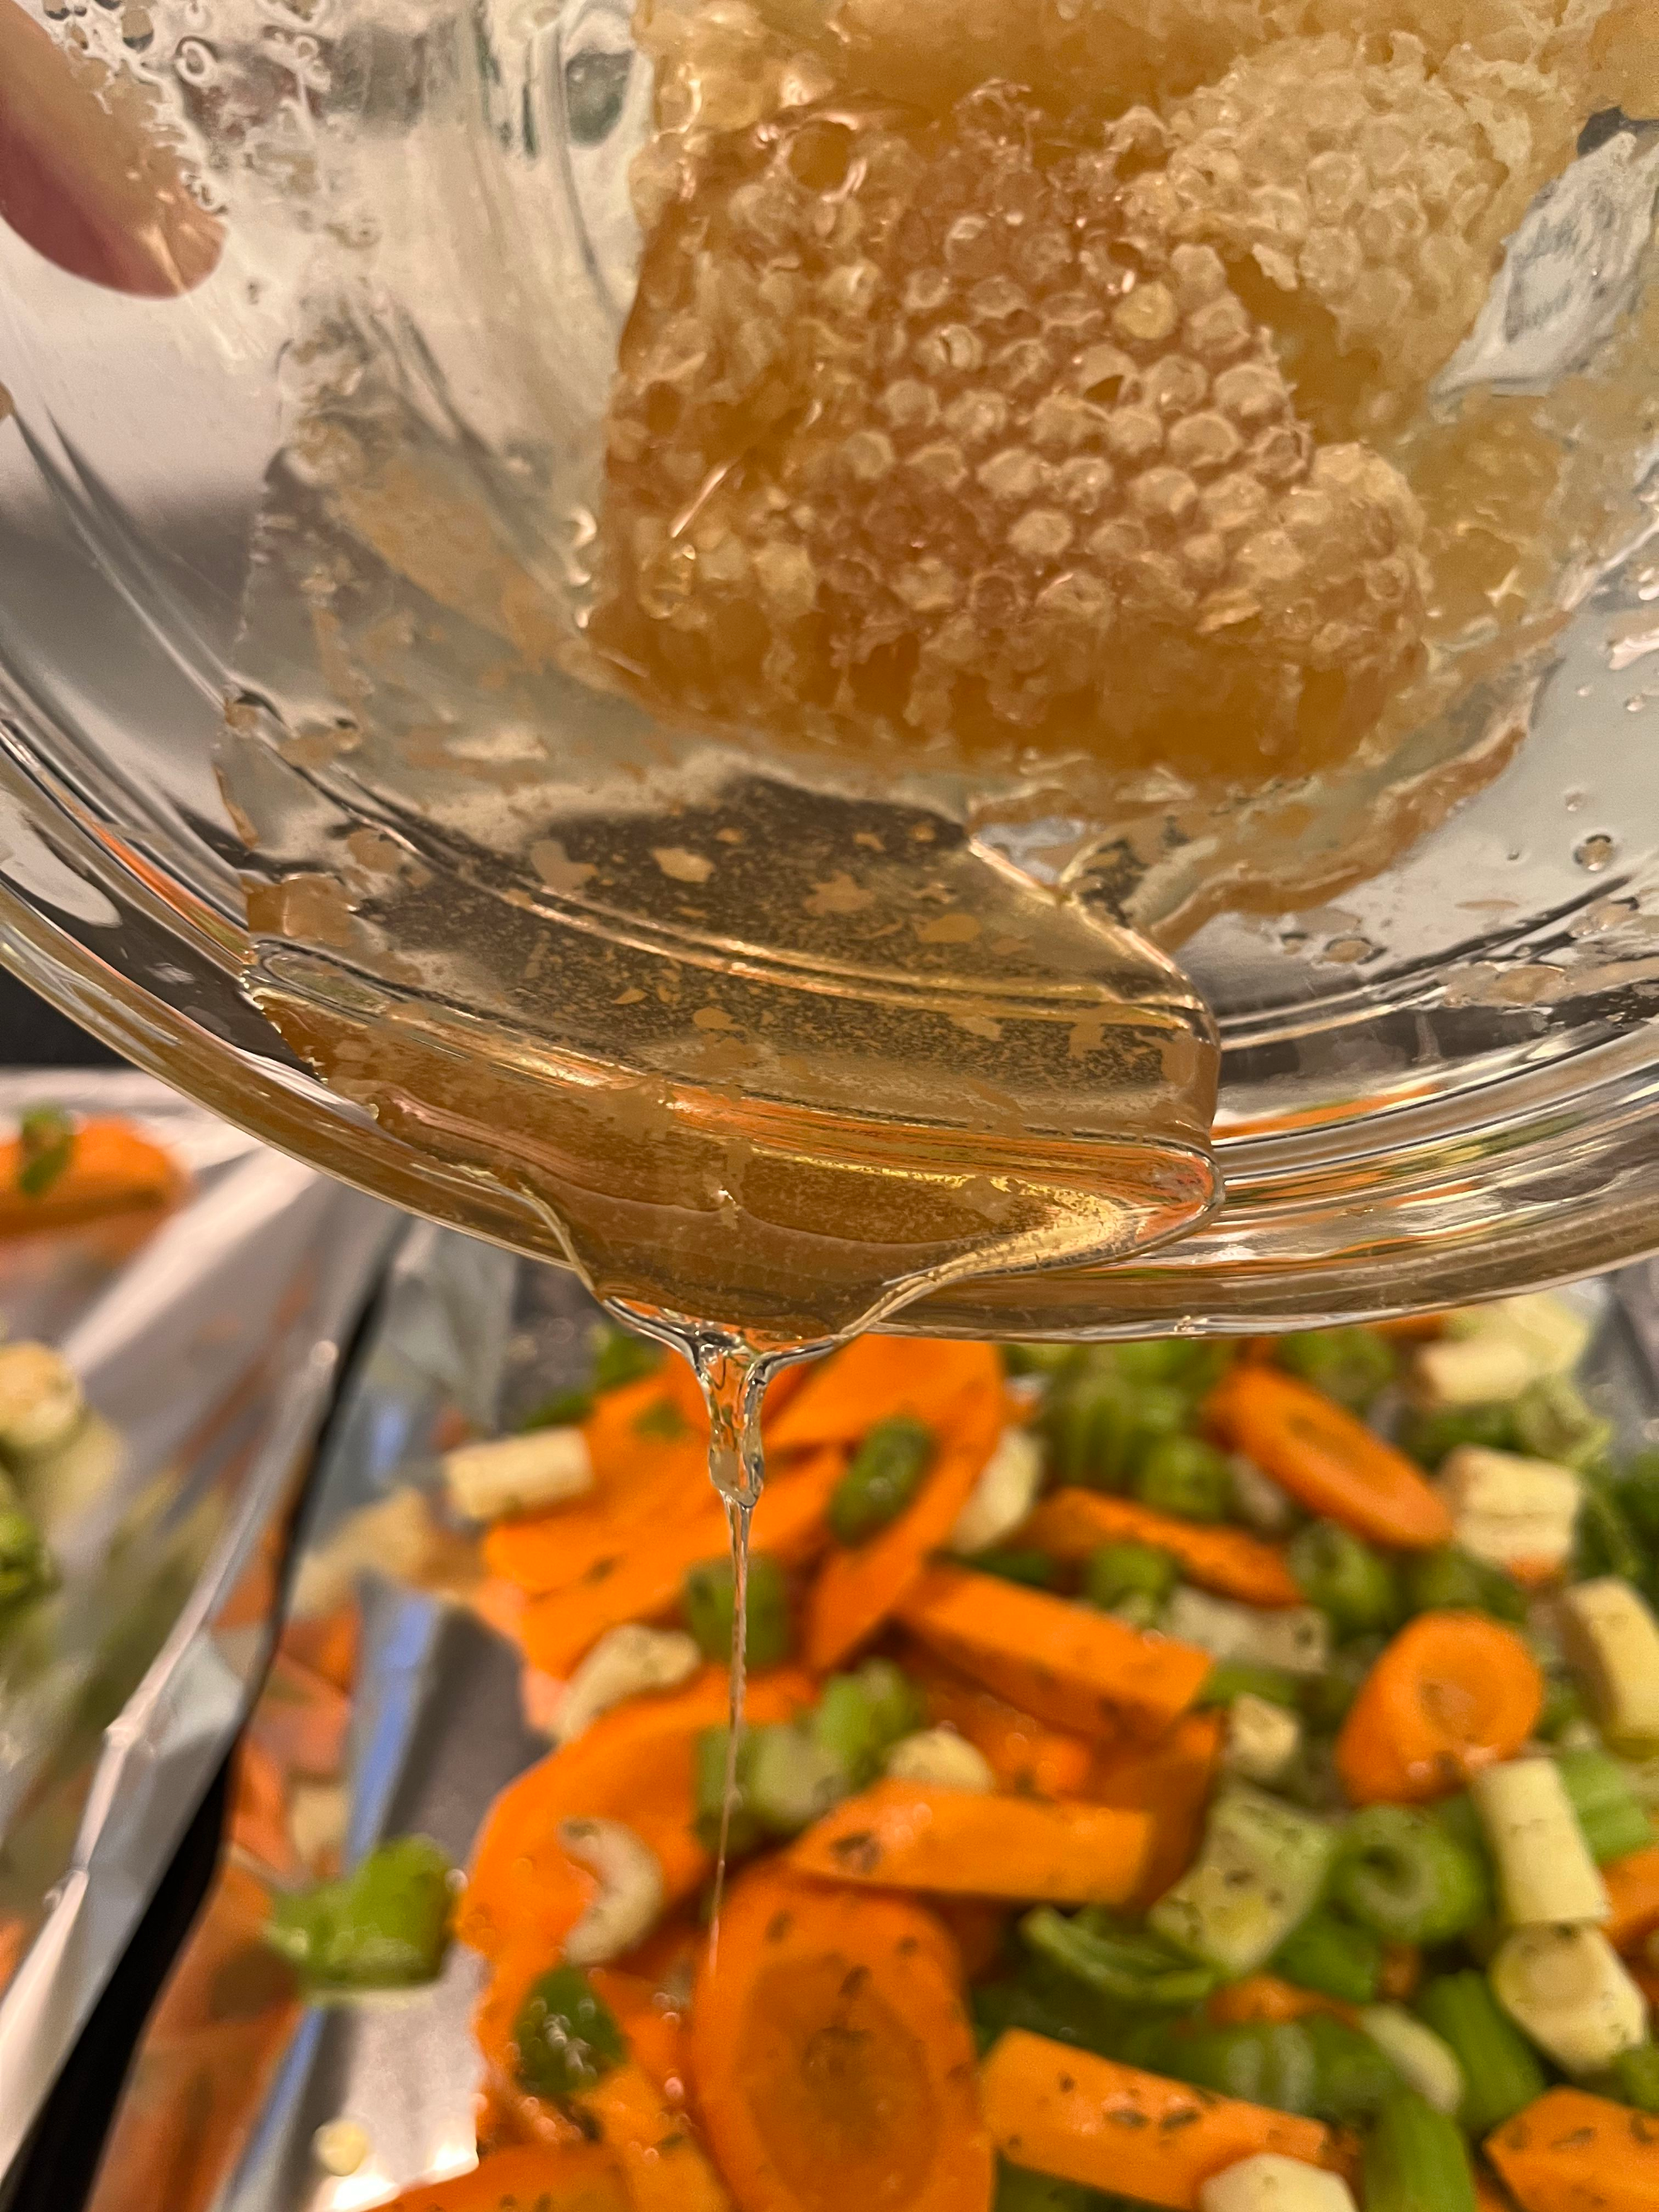 Pouring honey on vegetables.